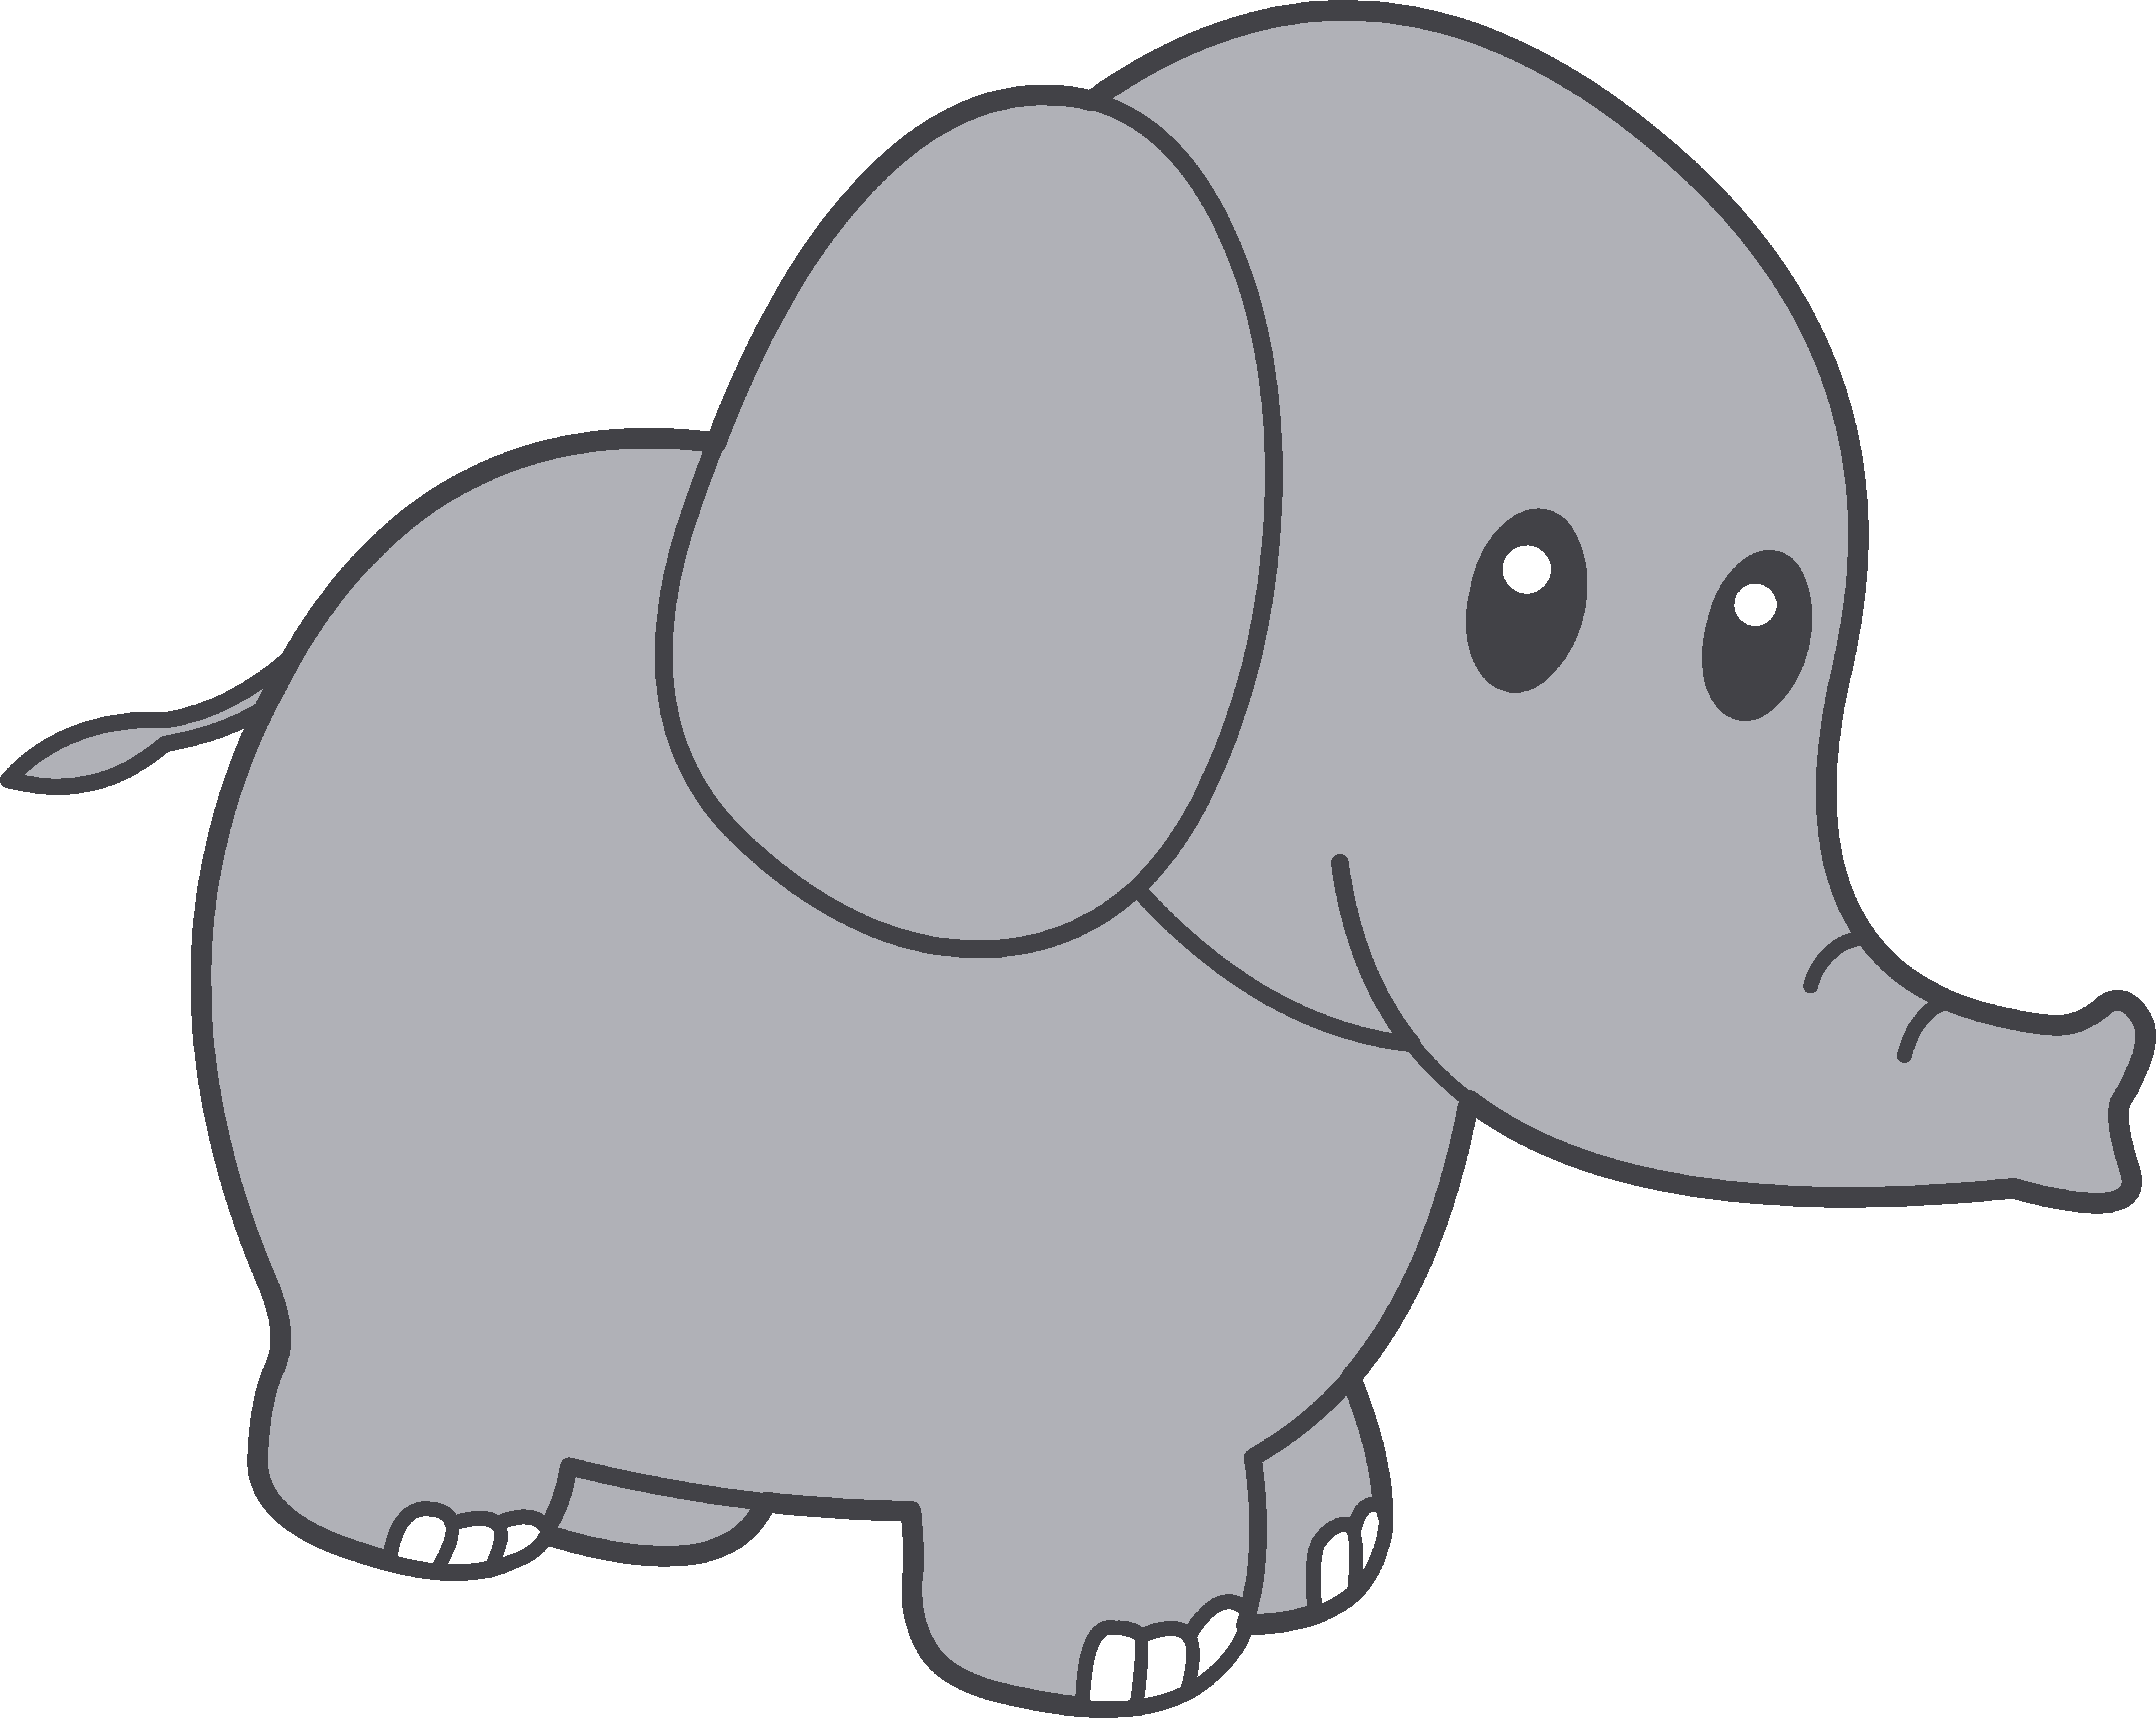 Cute Elephant Cartoon Images  Pictures - Becuo